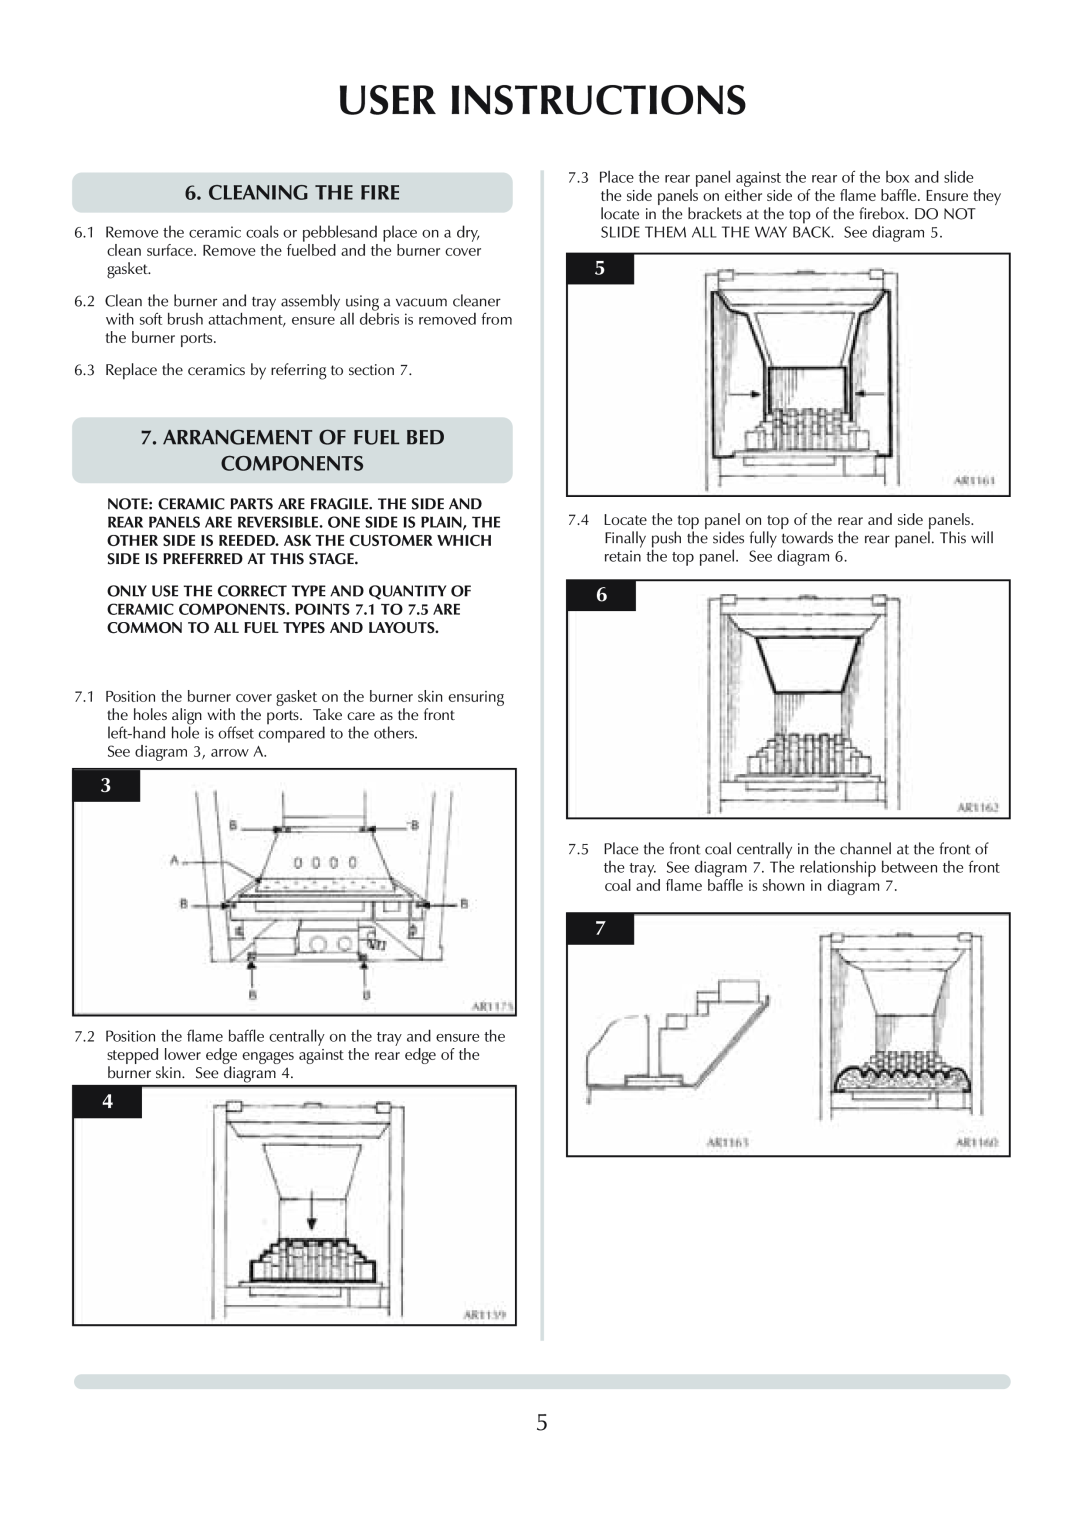 Stovax Logic Hotbox & Convector Fire manual User Instructions, Cleaning The Fire, Arrangement Of Fuel Bed Components 